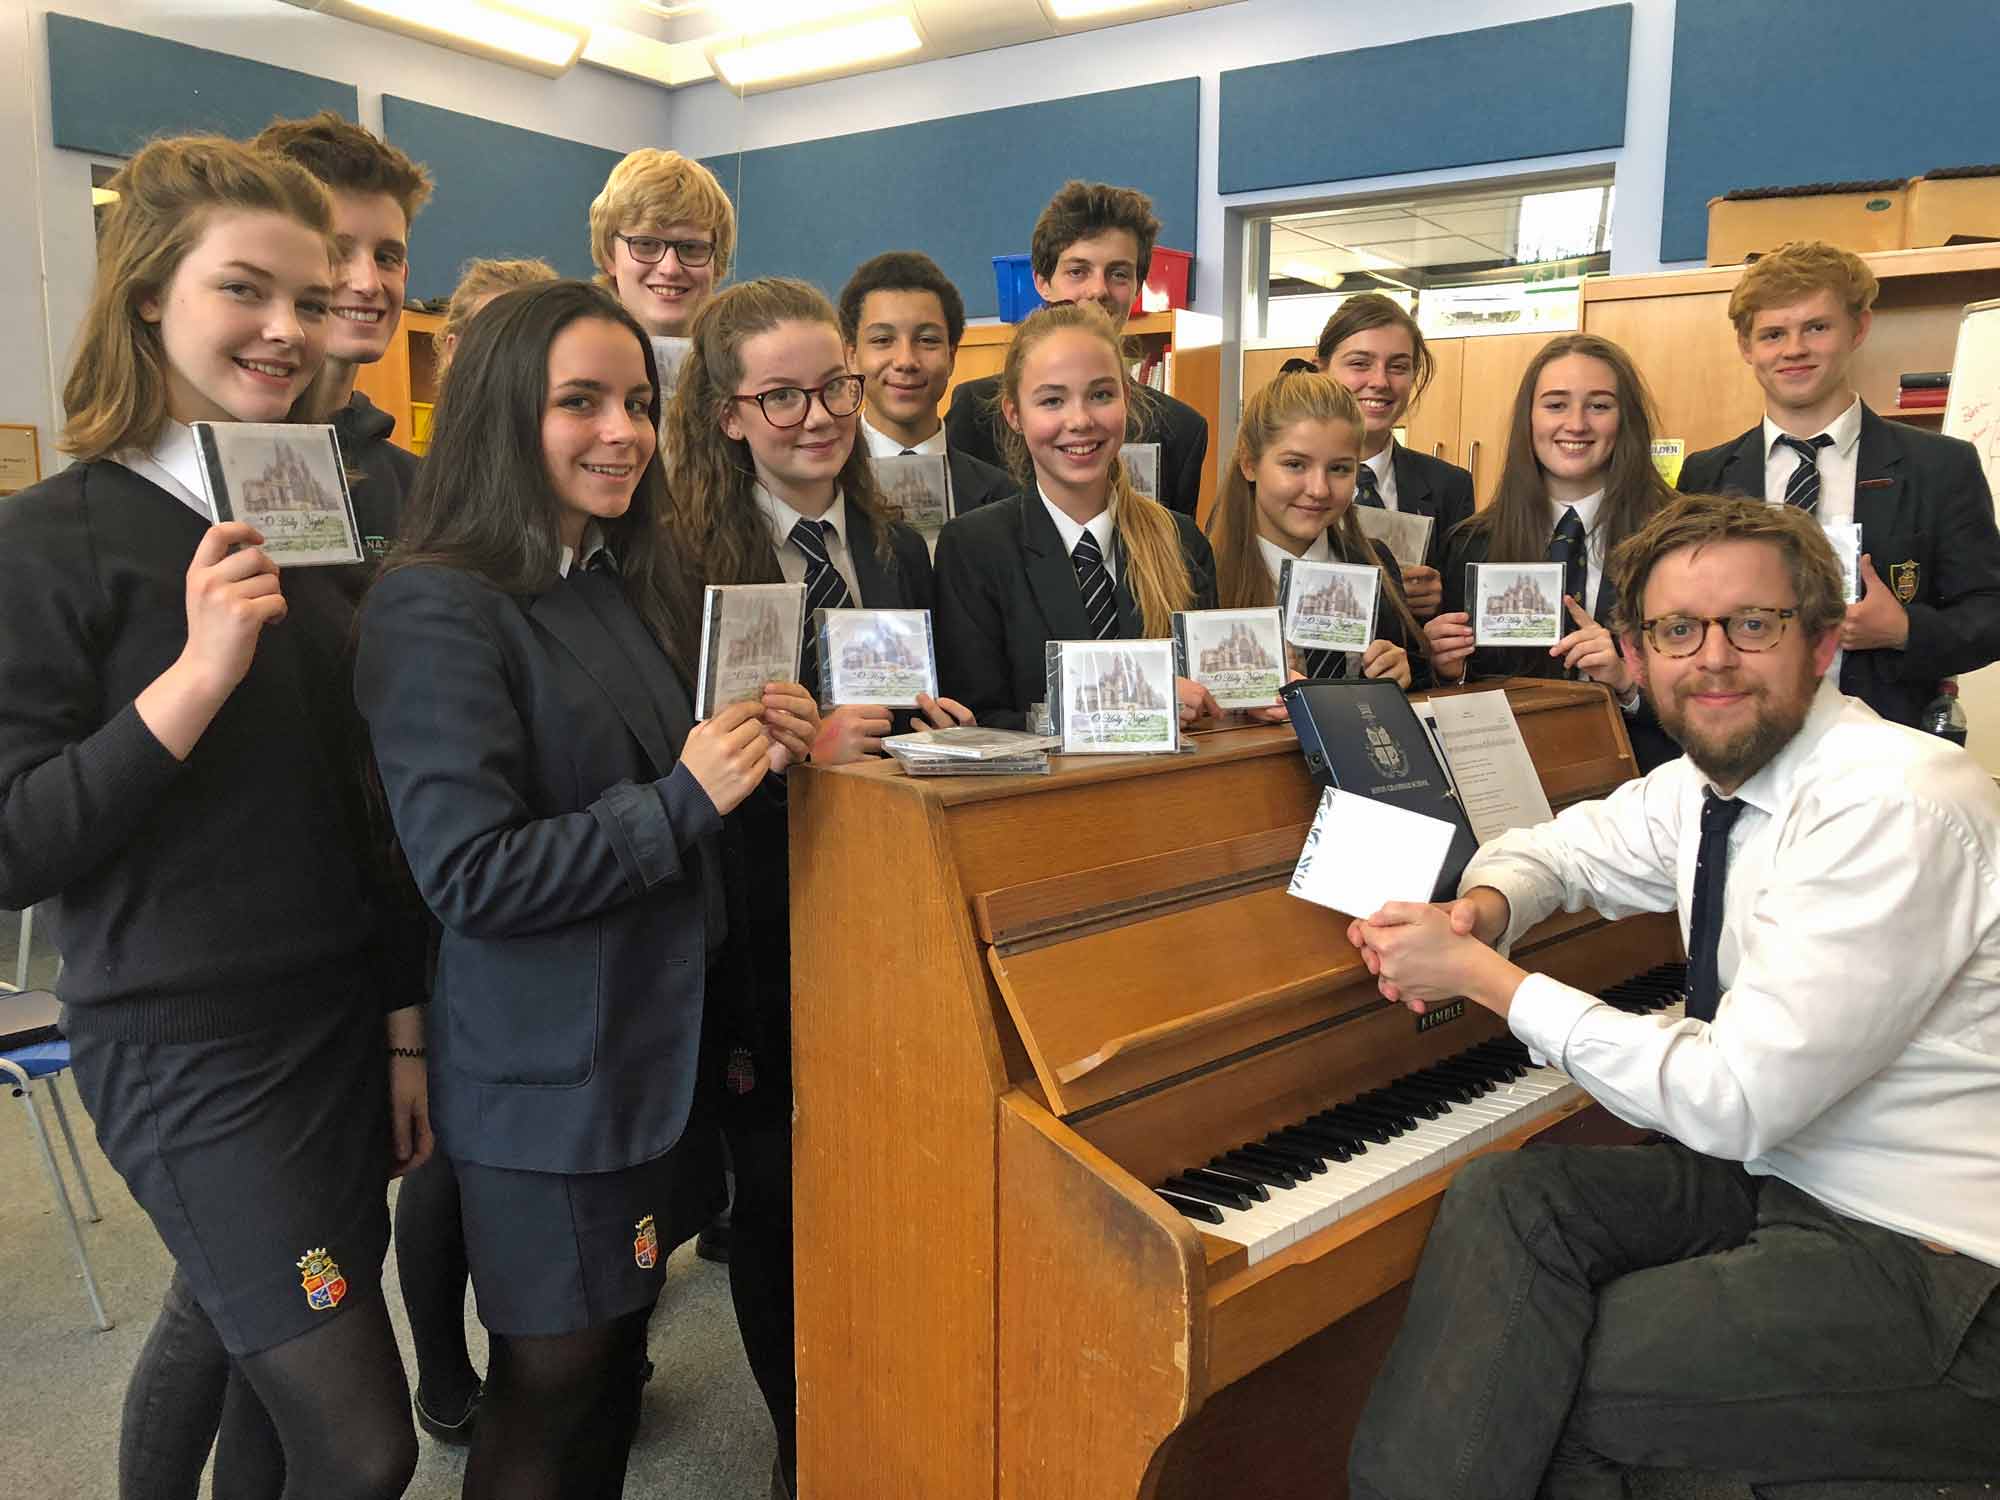 Students at a school with a growing reputation for stunning choral performances have released their debut album of Christmas carols, recorded in the magnificent setting of Ripon Cathedral